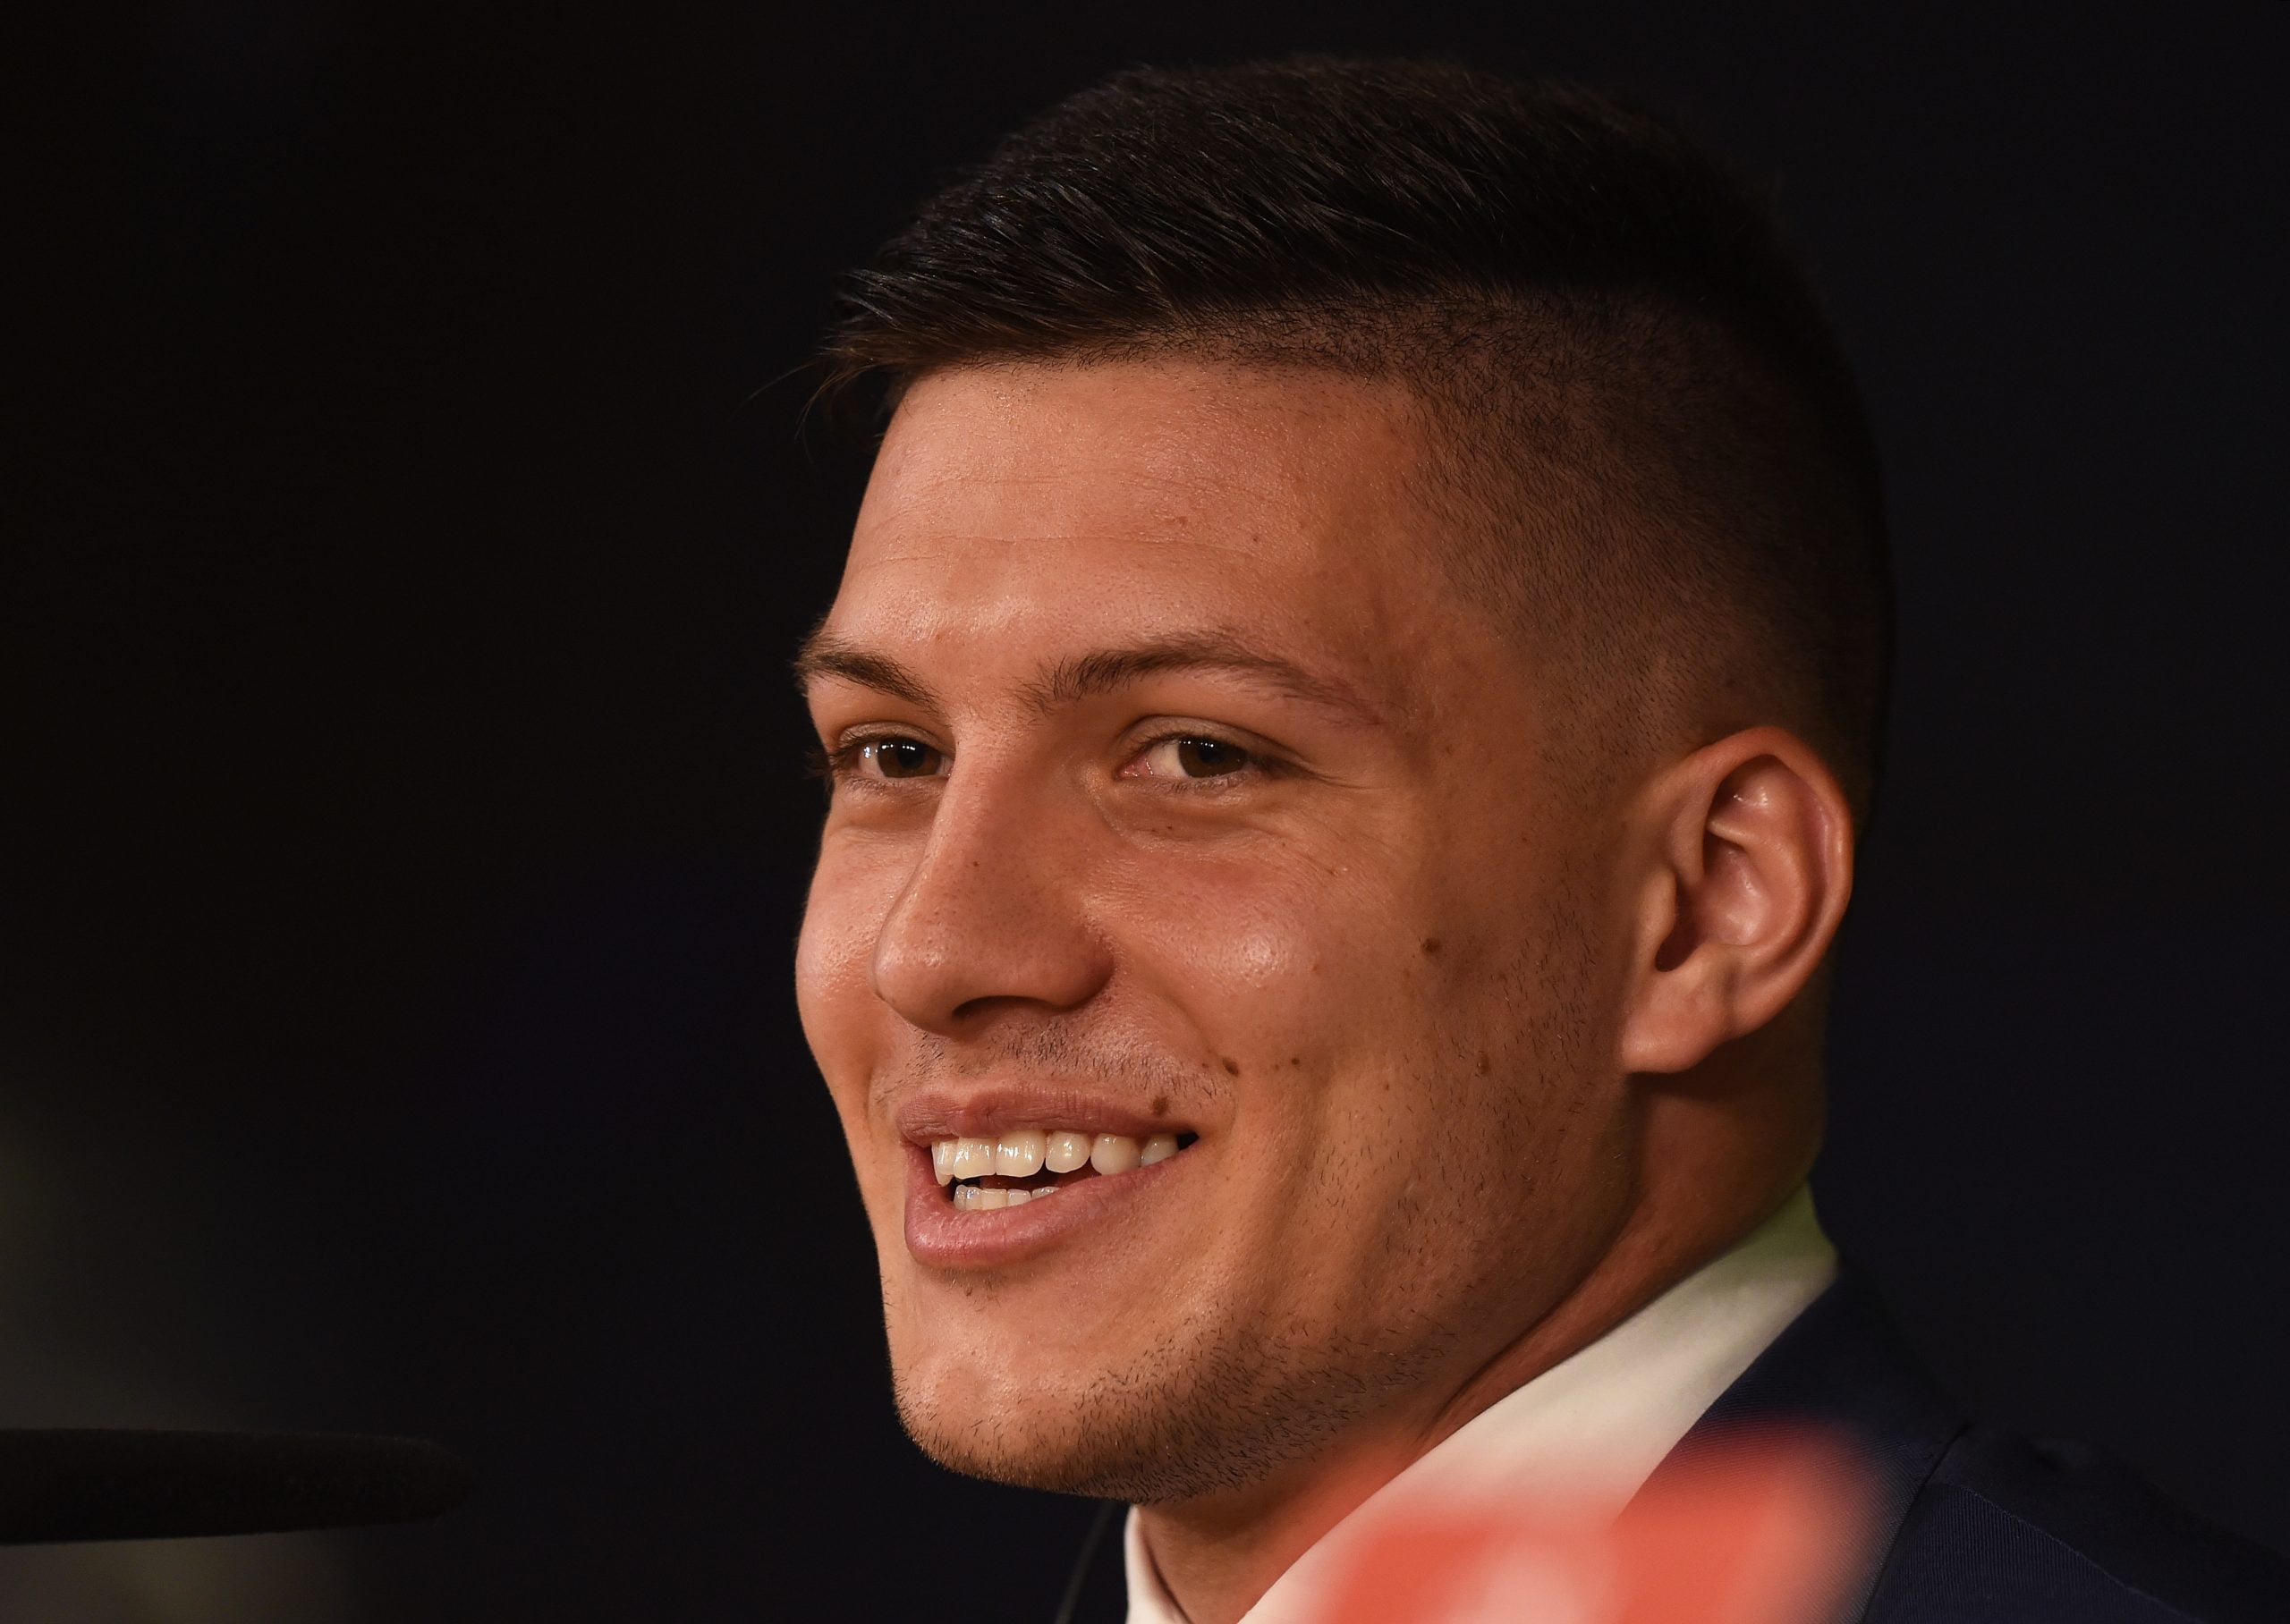 MADRID, SPAIN - JUNE 12: Luka Jovic holds a press conference after his unveiling as a new Real Madrid signing at Estadio Santiago Bernabeu on June 12, 2019 in Madrid, Spain. (Photo by Denis Doyle/Getty Images)